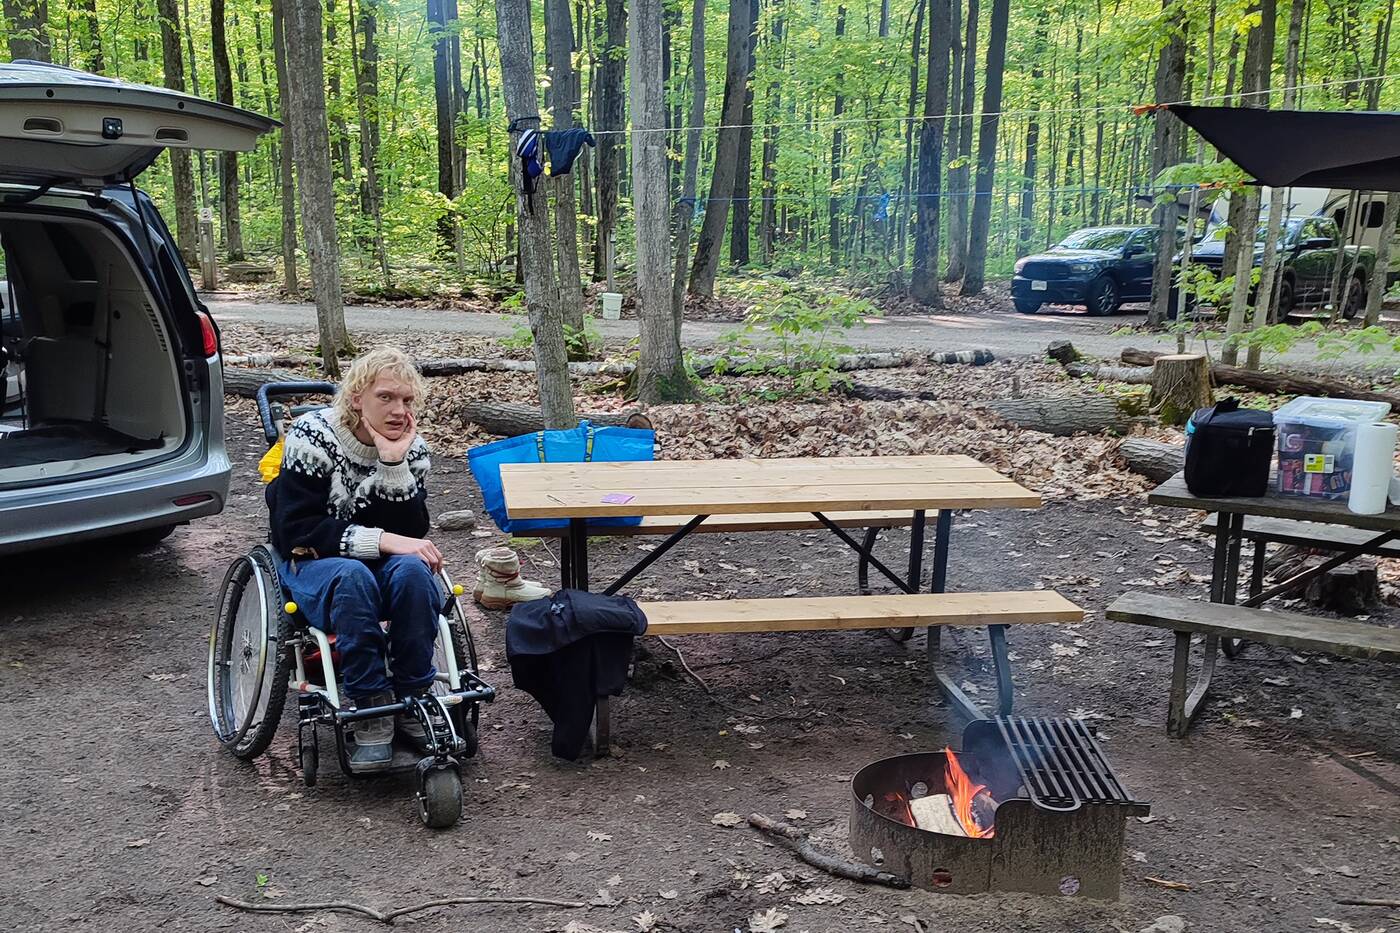 Toronto mom son accessible hiking